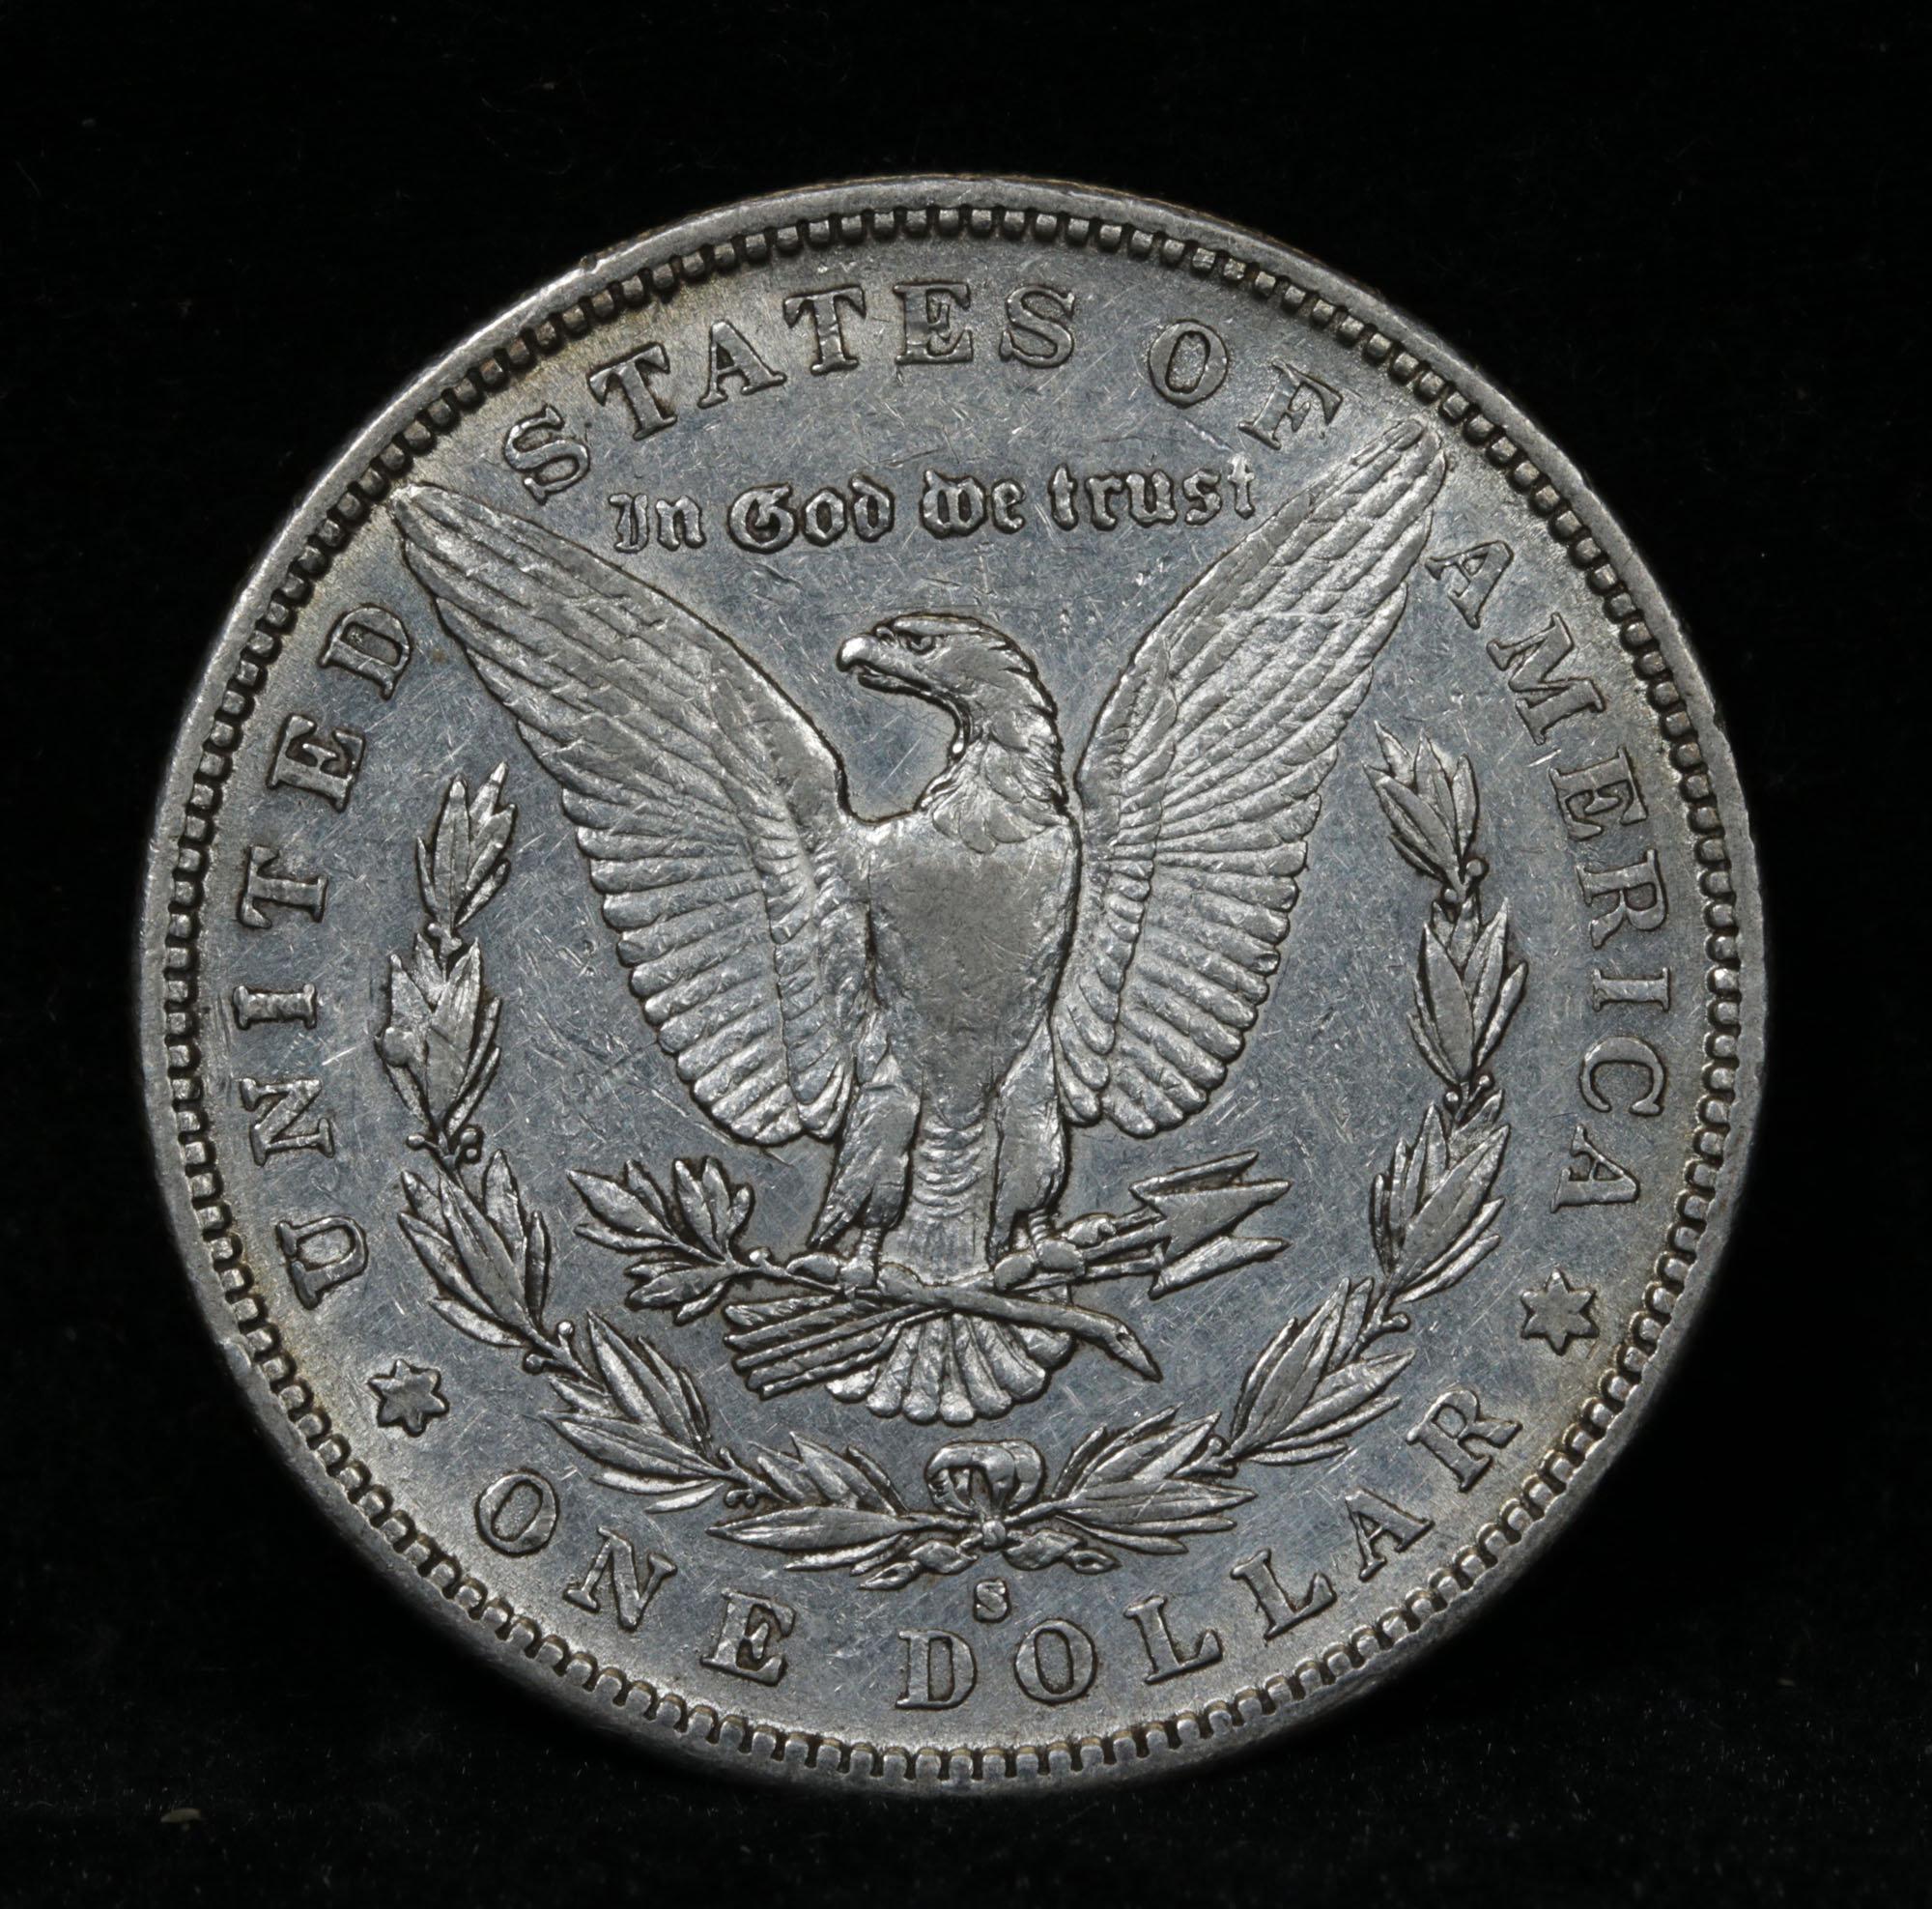 ***Auction Highlight*** Key date 1884-s Morgan Dollar $1 Graded Select AU PL by USCG (fc)